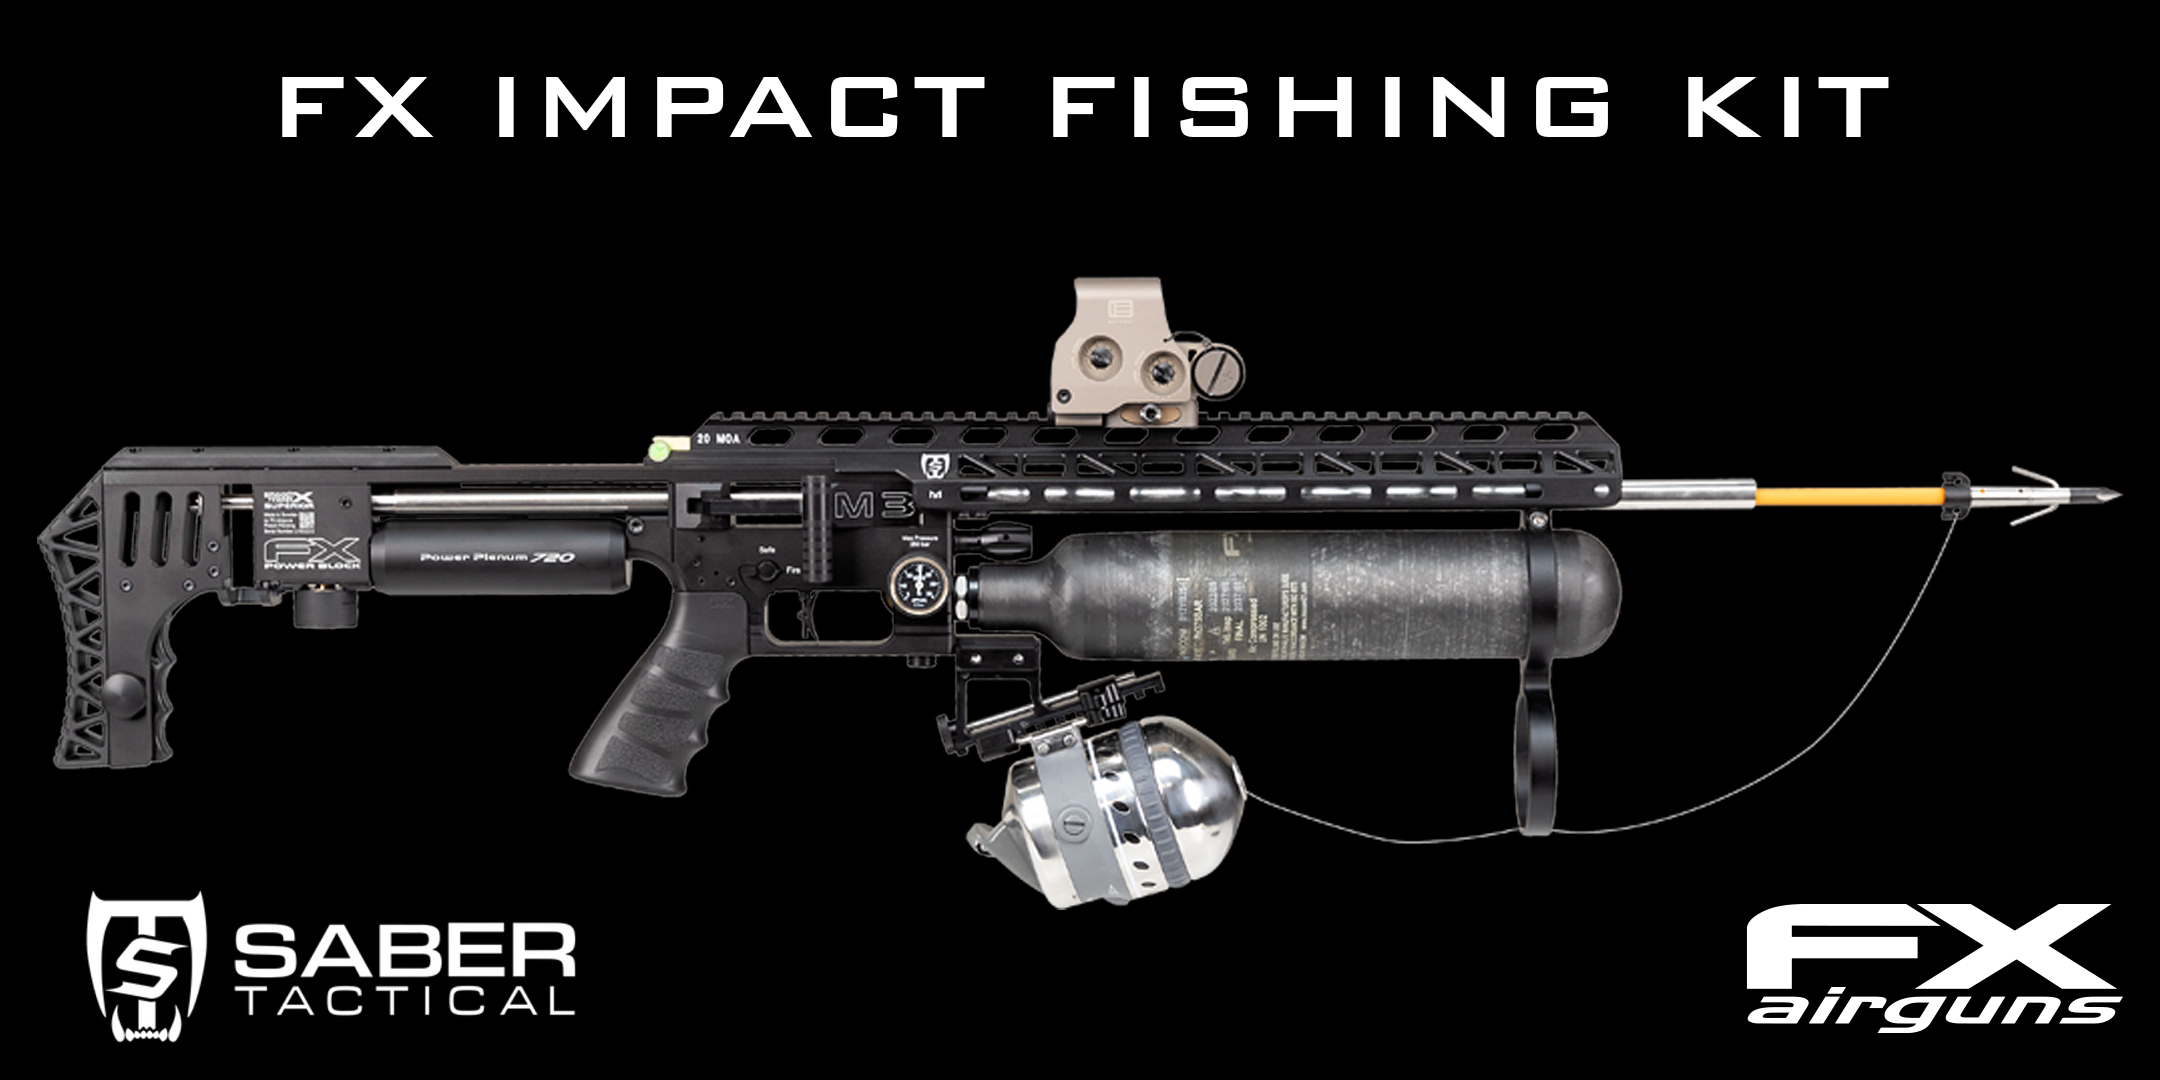 Saber Tactical releases the new FX Impact Fishing Kit Today